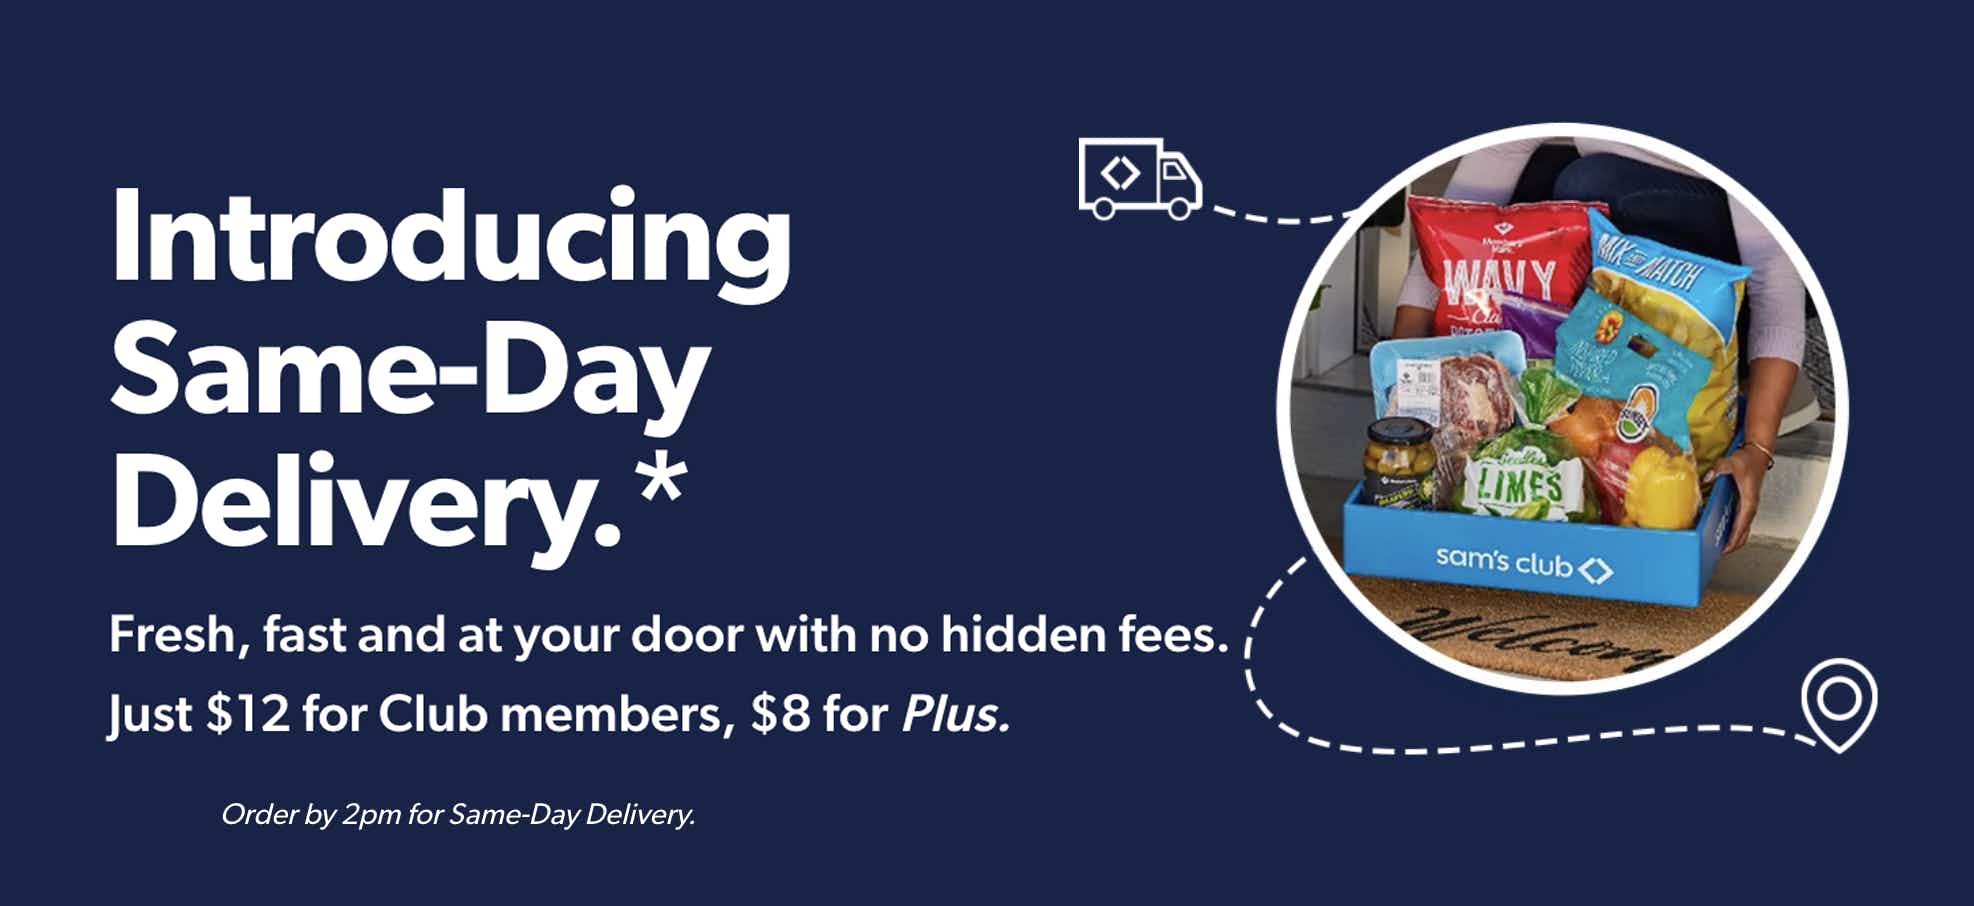 Sam's Club Delivery Options: Same-Day vs Instacart - The Krazy